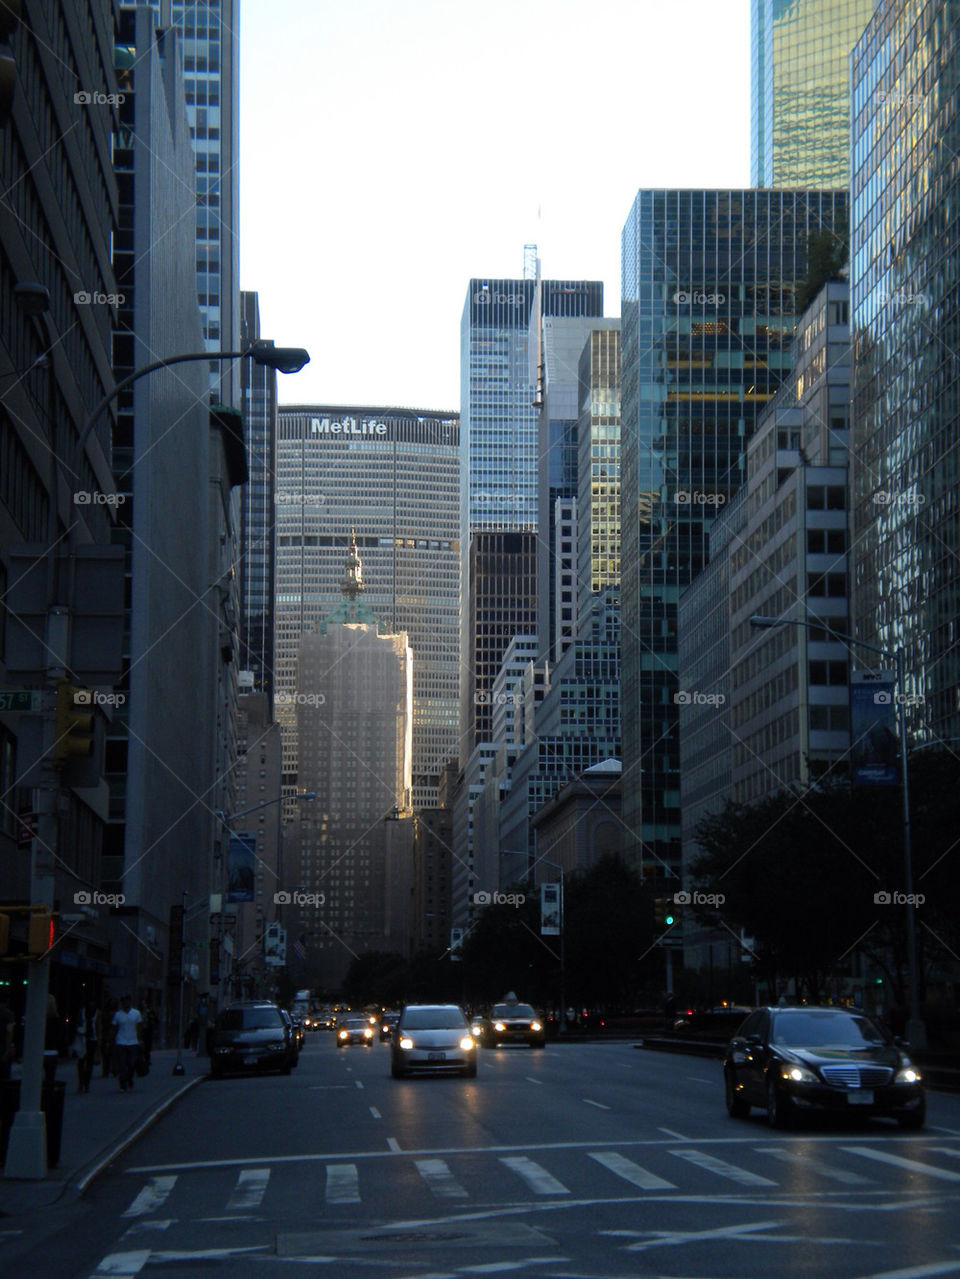 buildings usa new streets by irallada